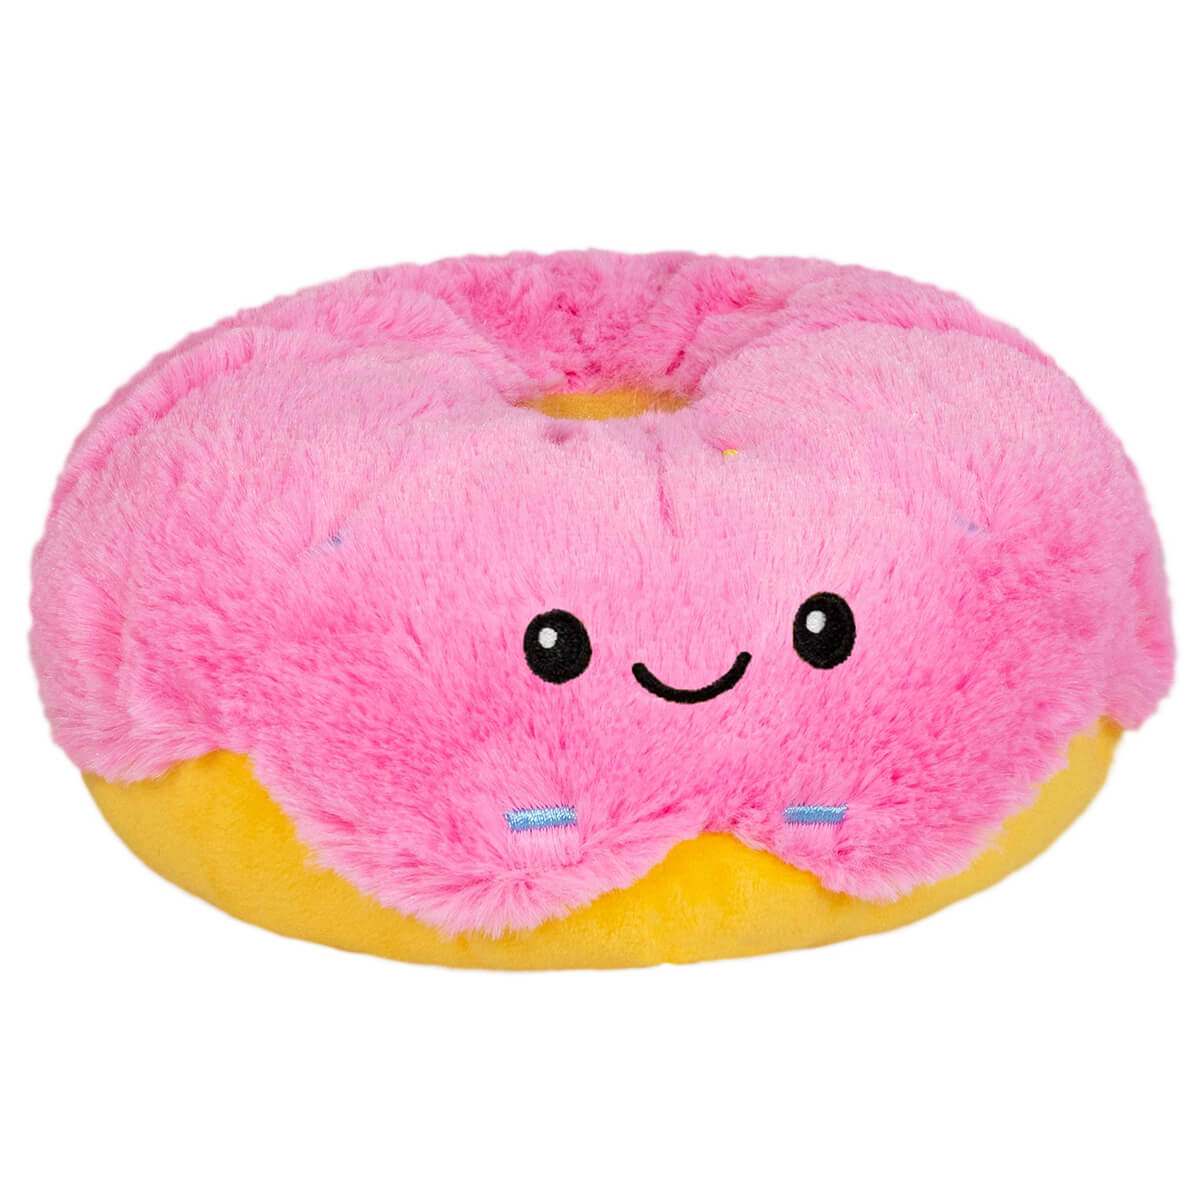 Squishable Snugglemi Snackers Pink